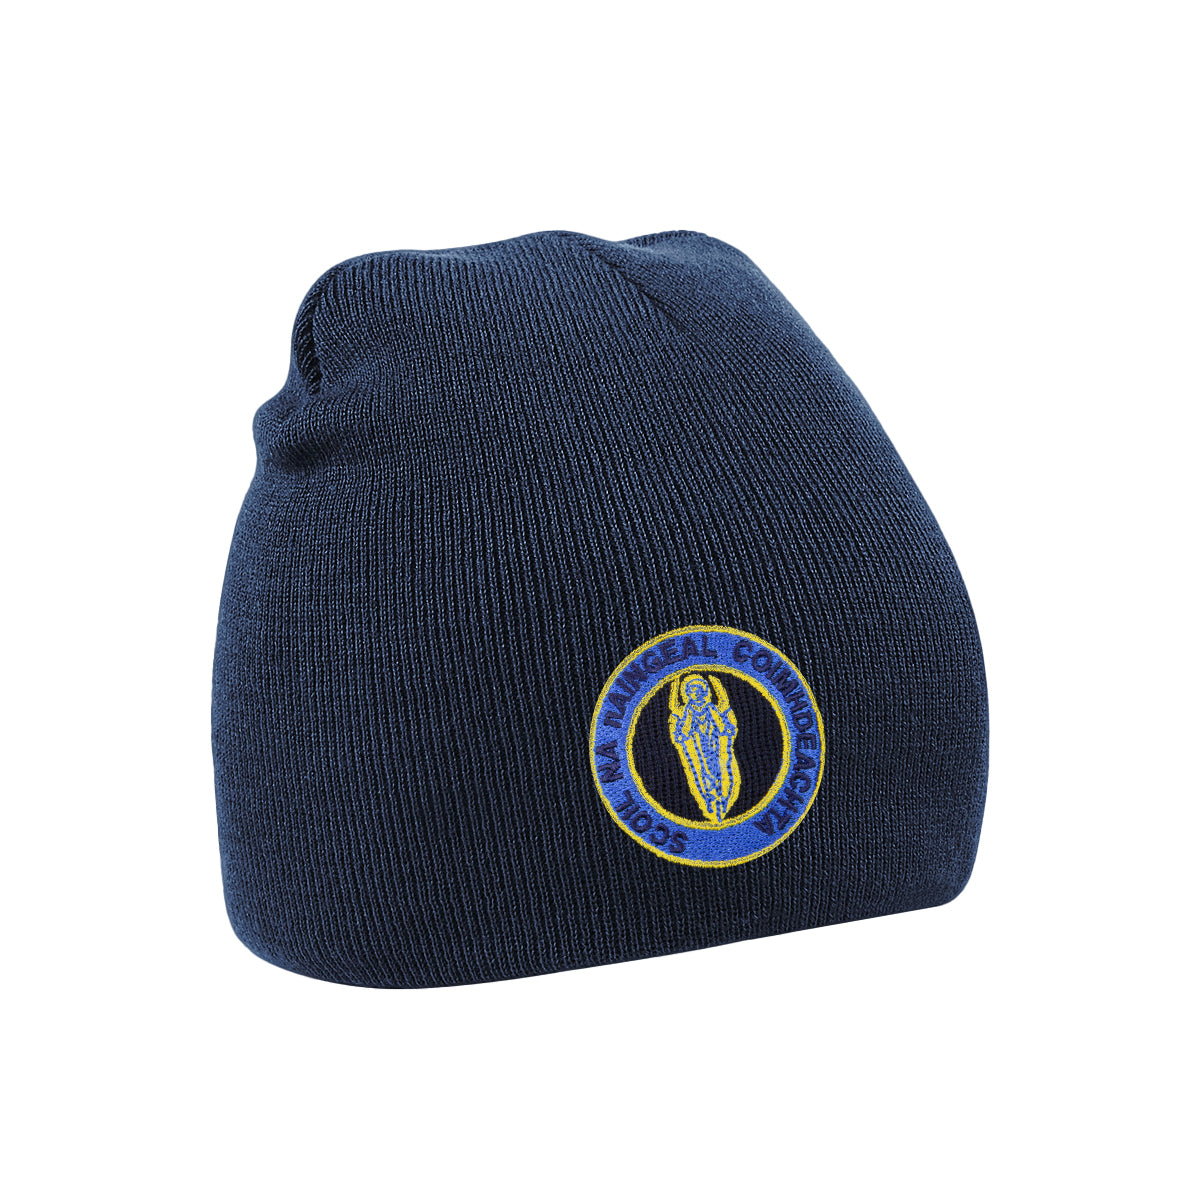 A photo of the Guardian Angels National School Beanie with embroideredschool crest.